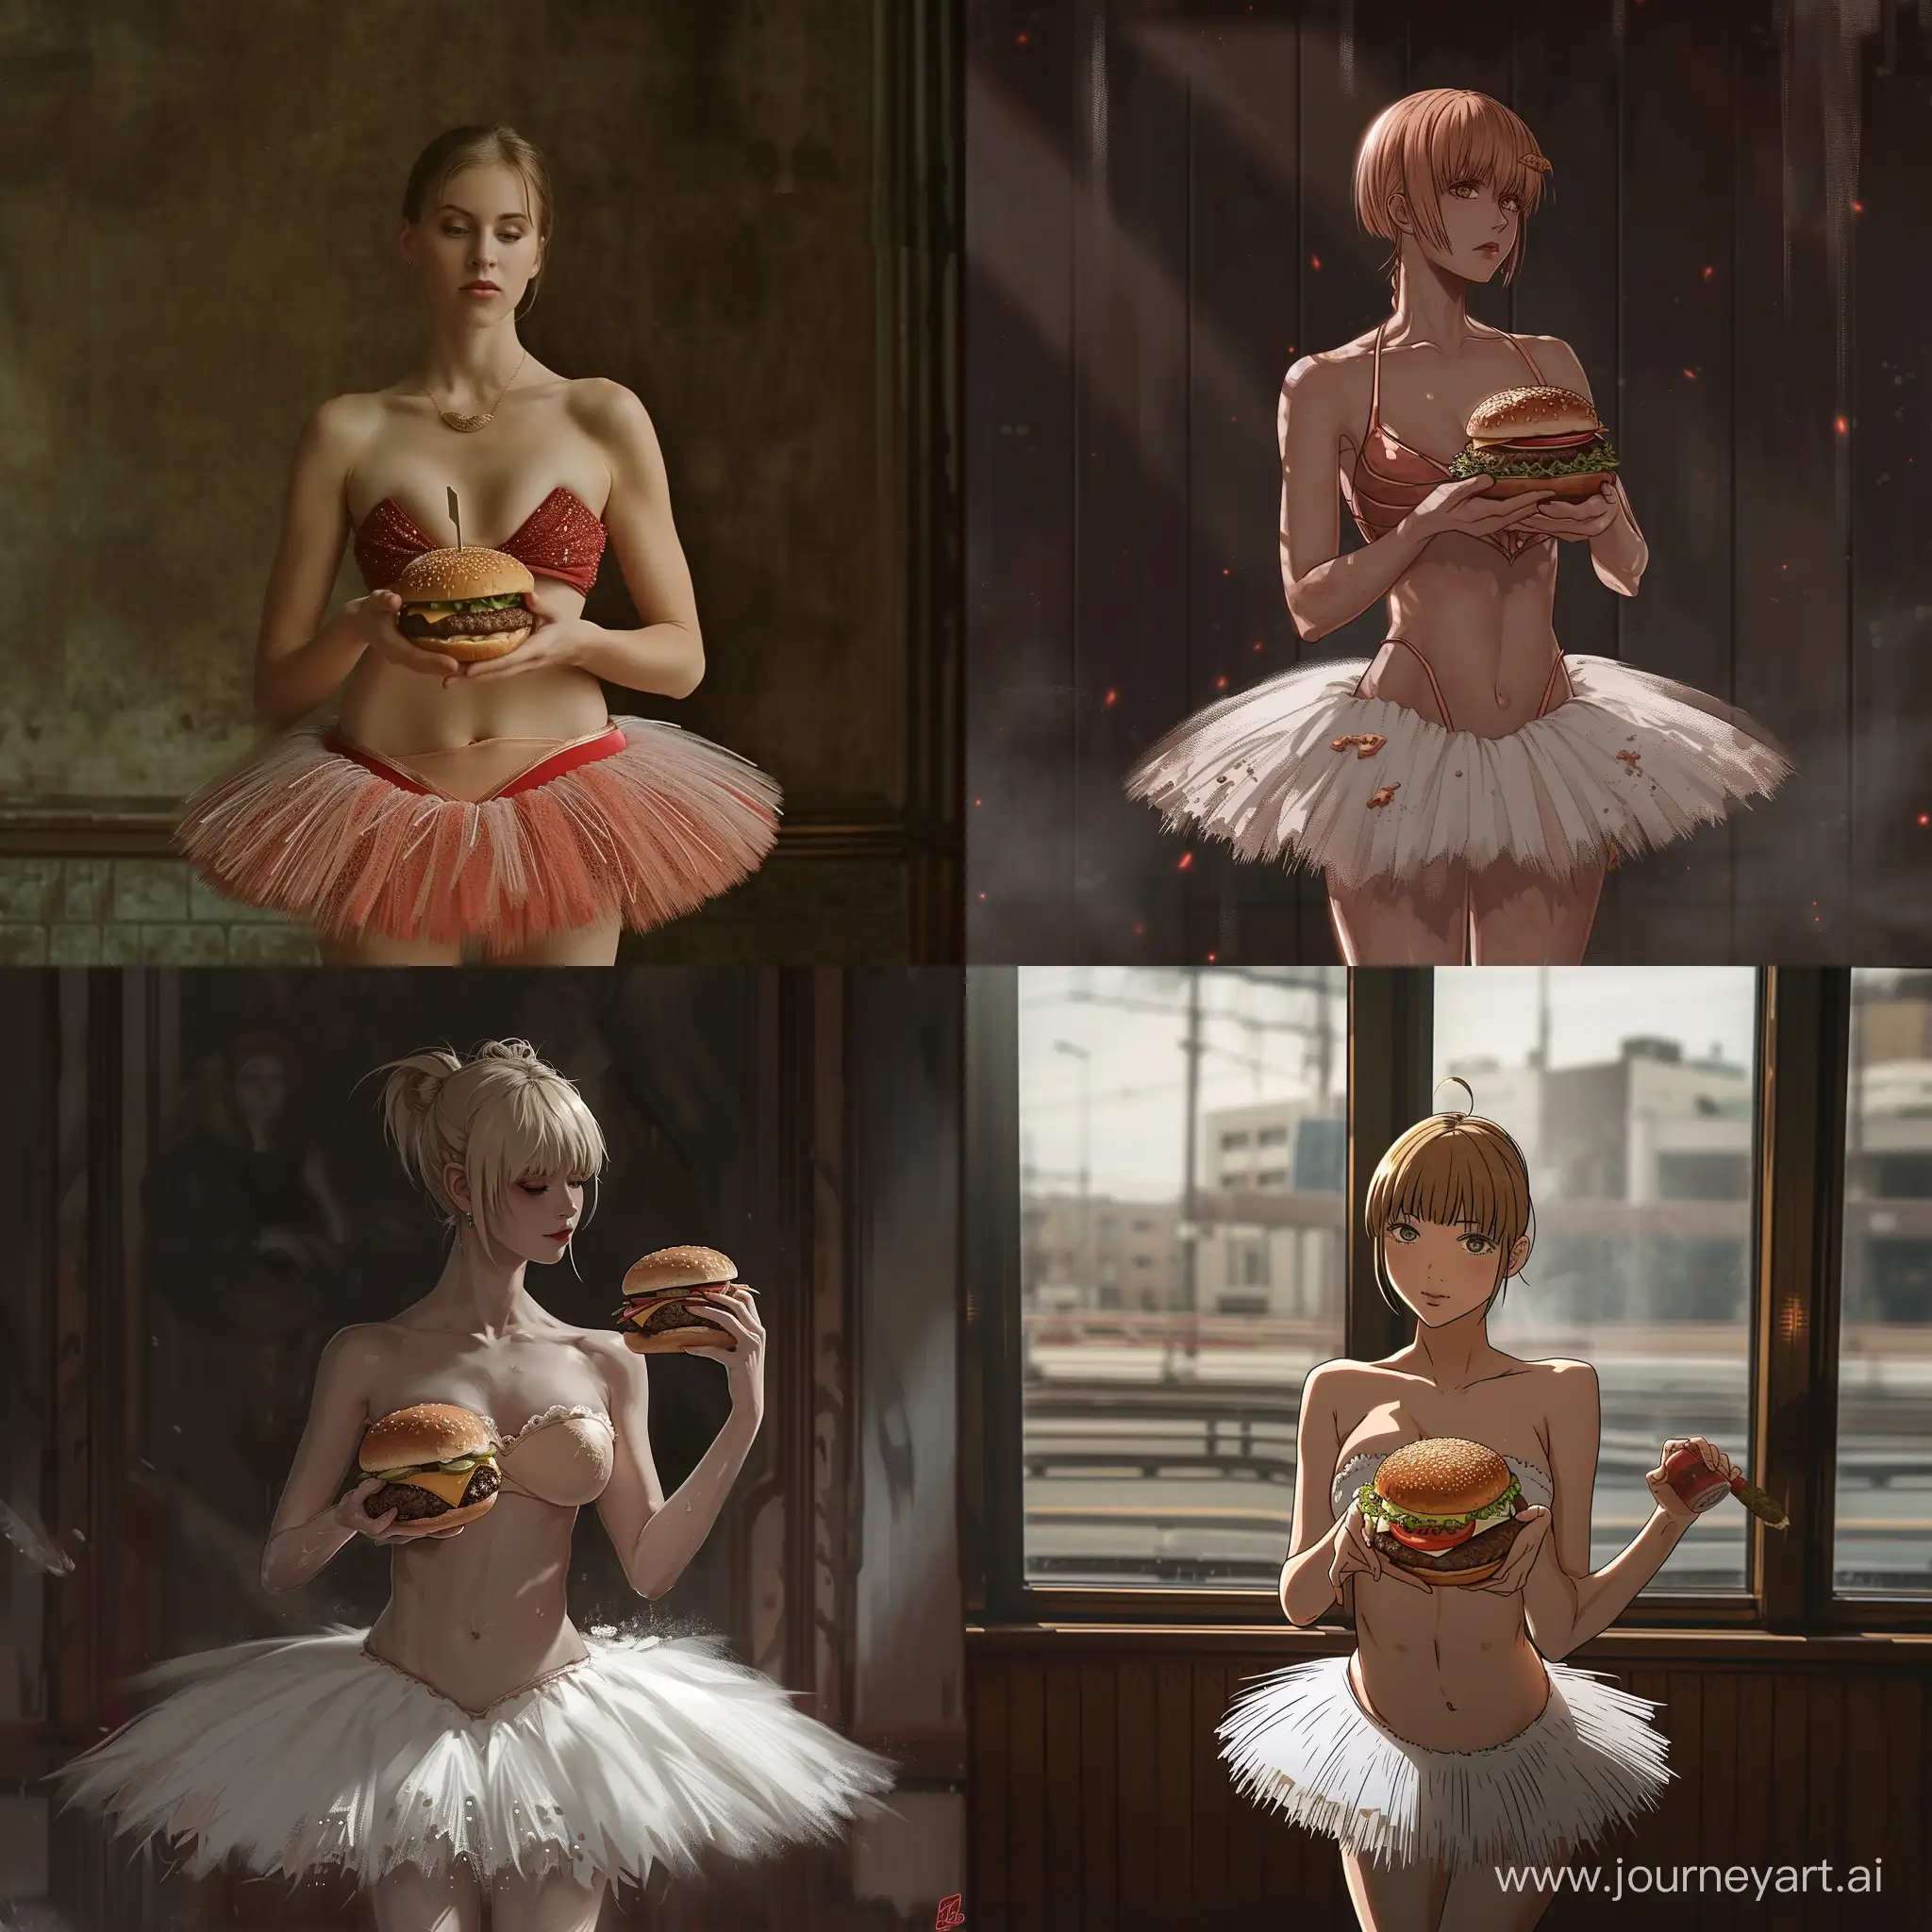 Ballerina from Atomic Heart holds a burger in her hands